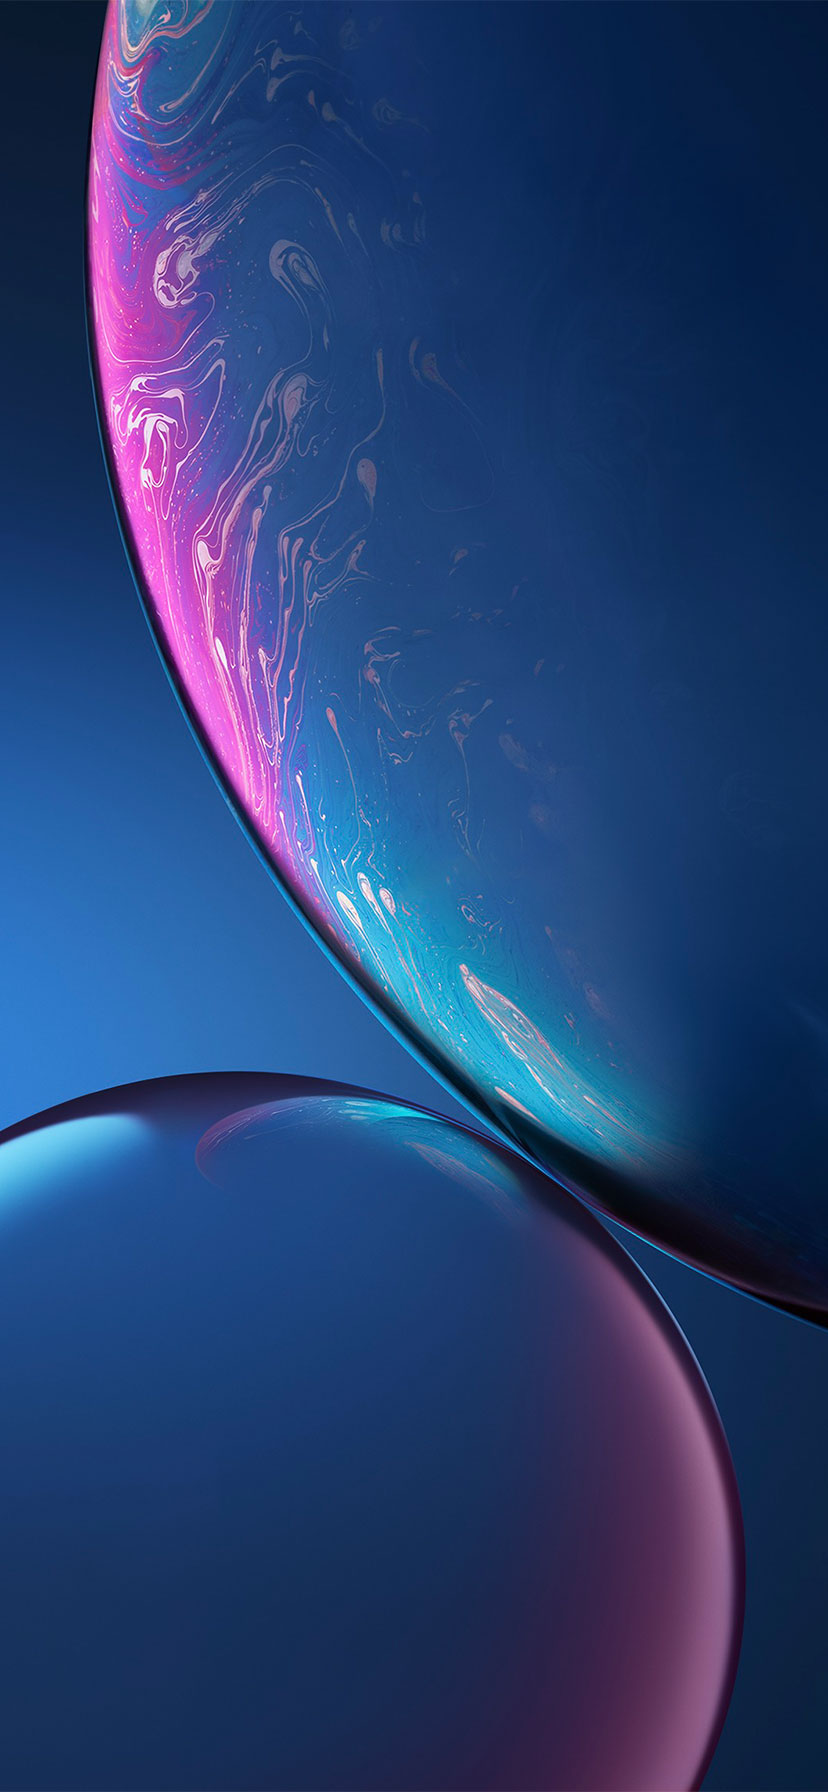 Iphone xr hd wallpapers